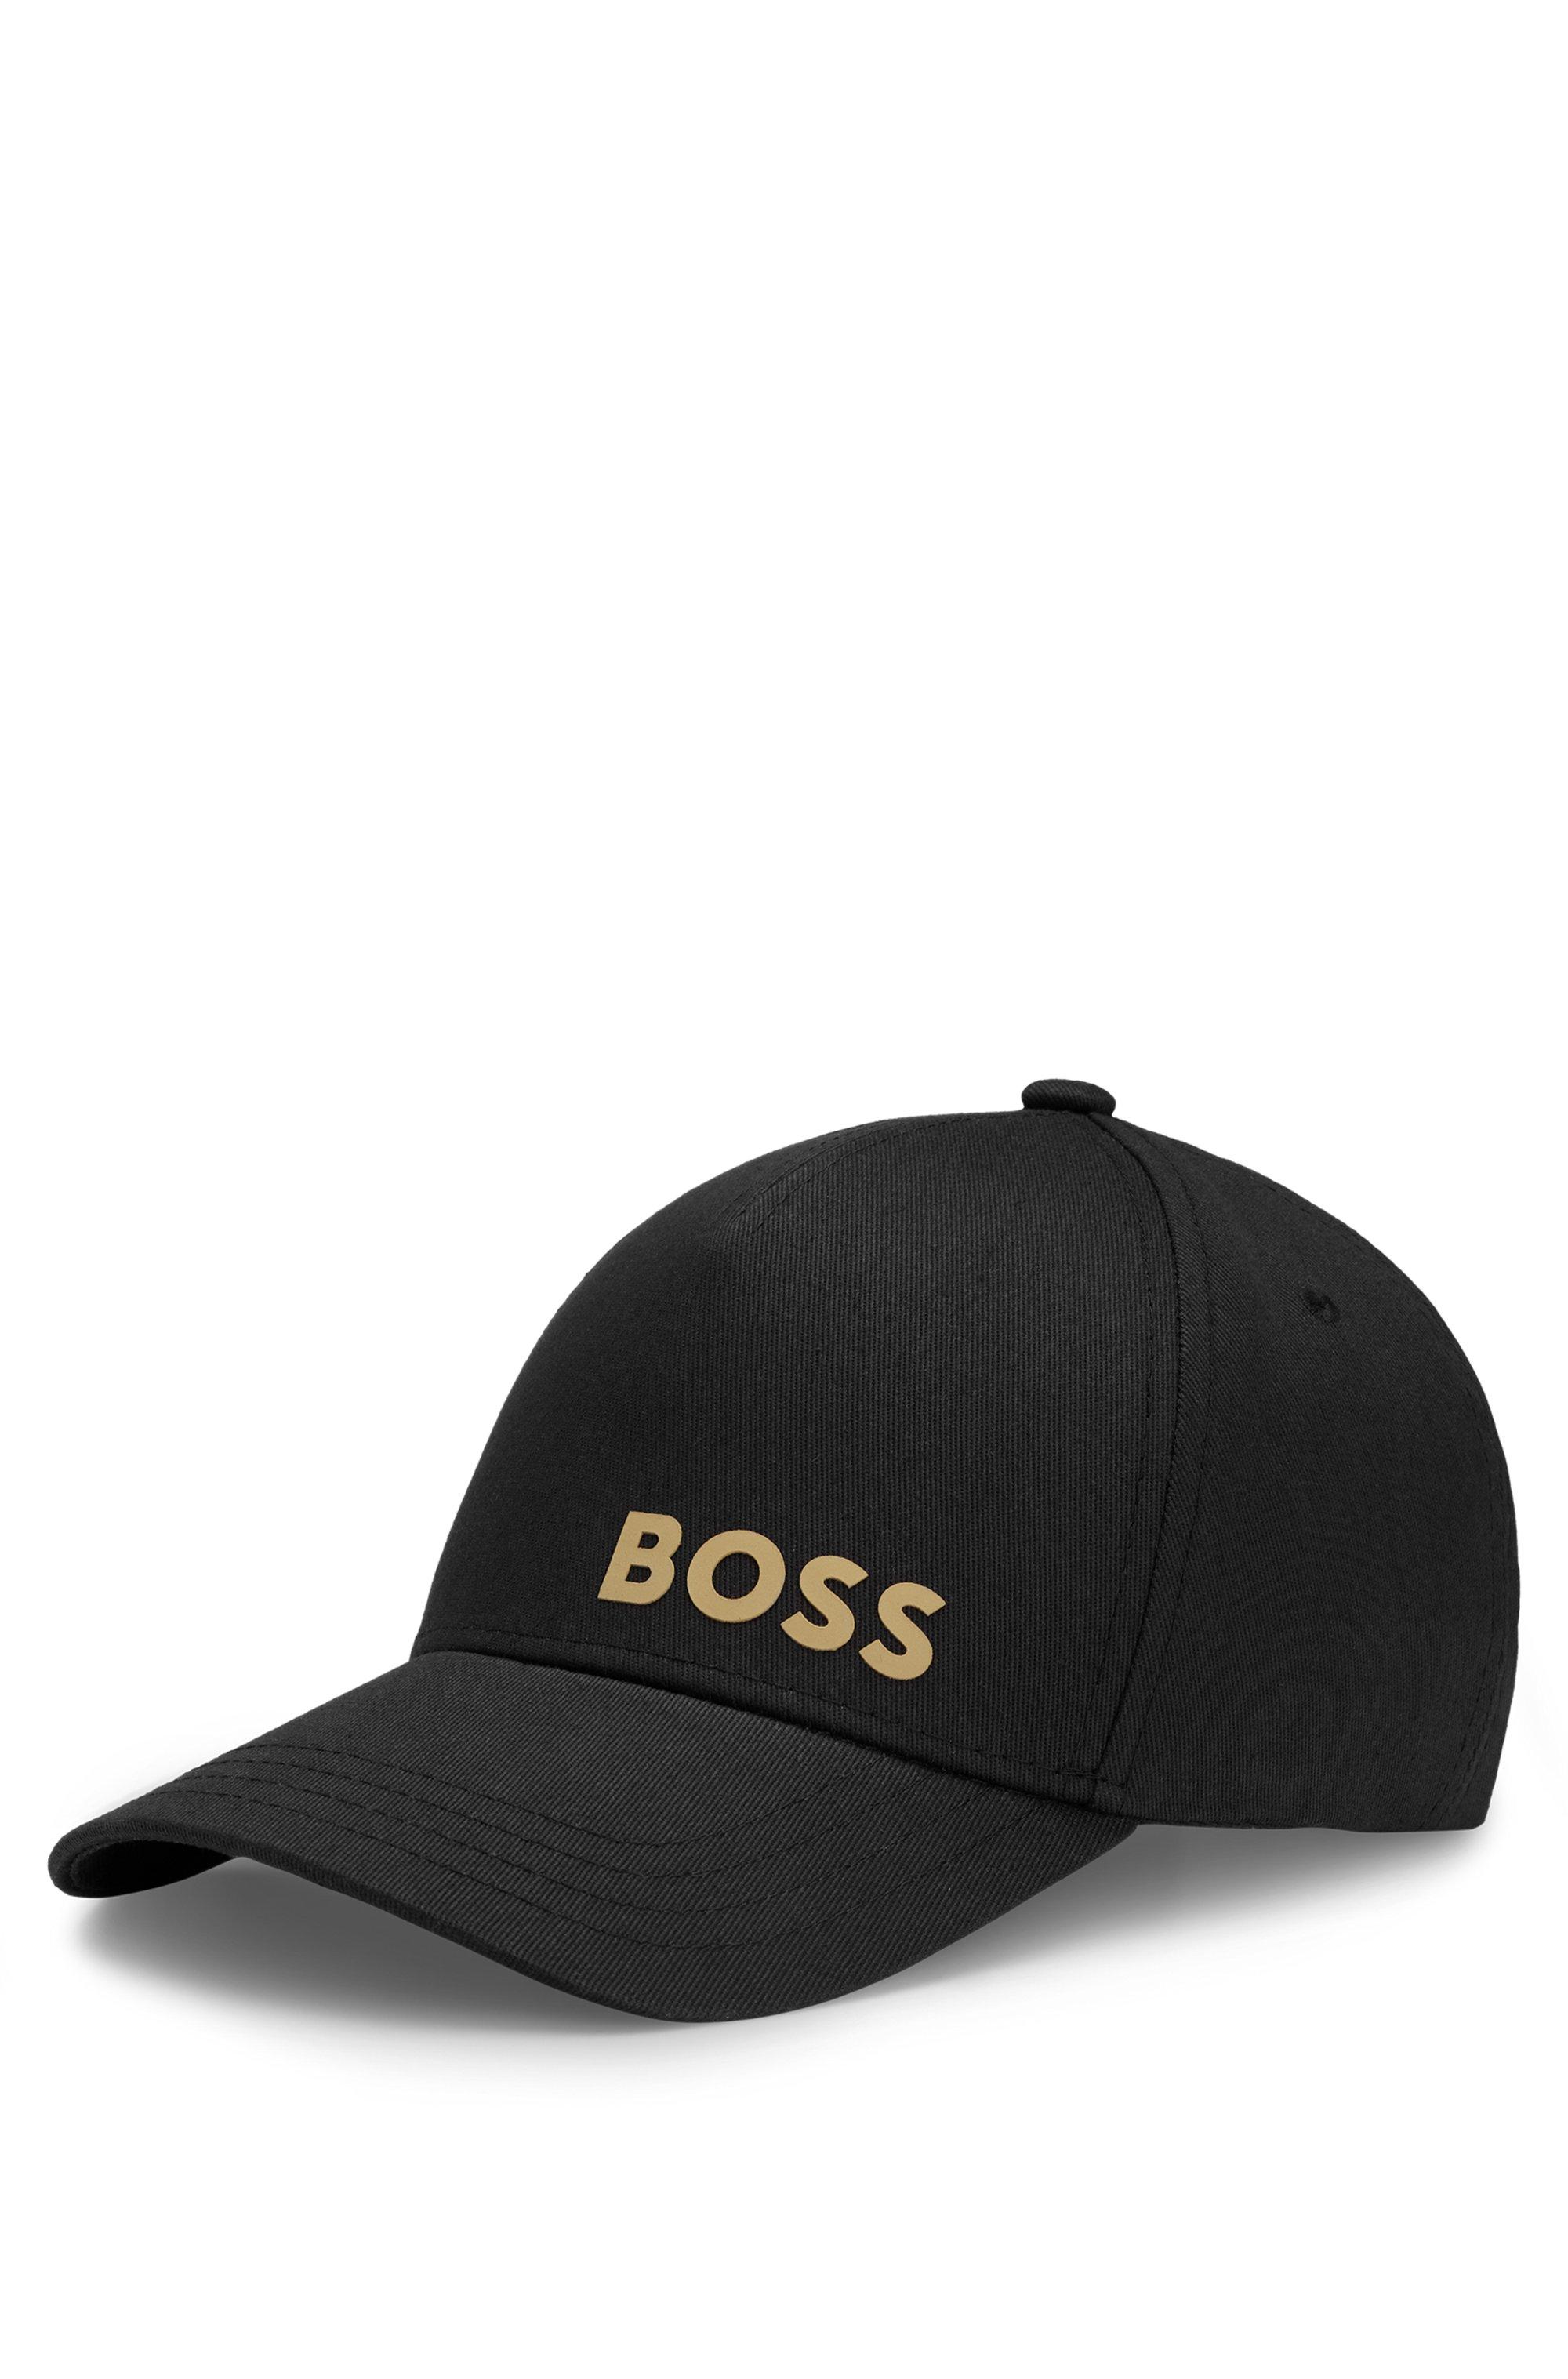 BOSS by HUGO BOSS Cotton-twill Cap With Mixed Logos in Black for Men | Lyst